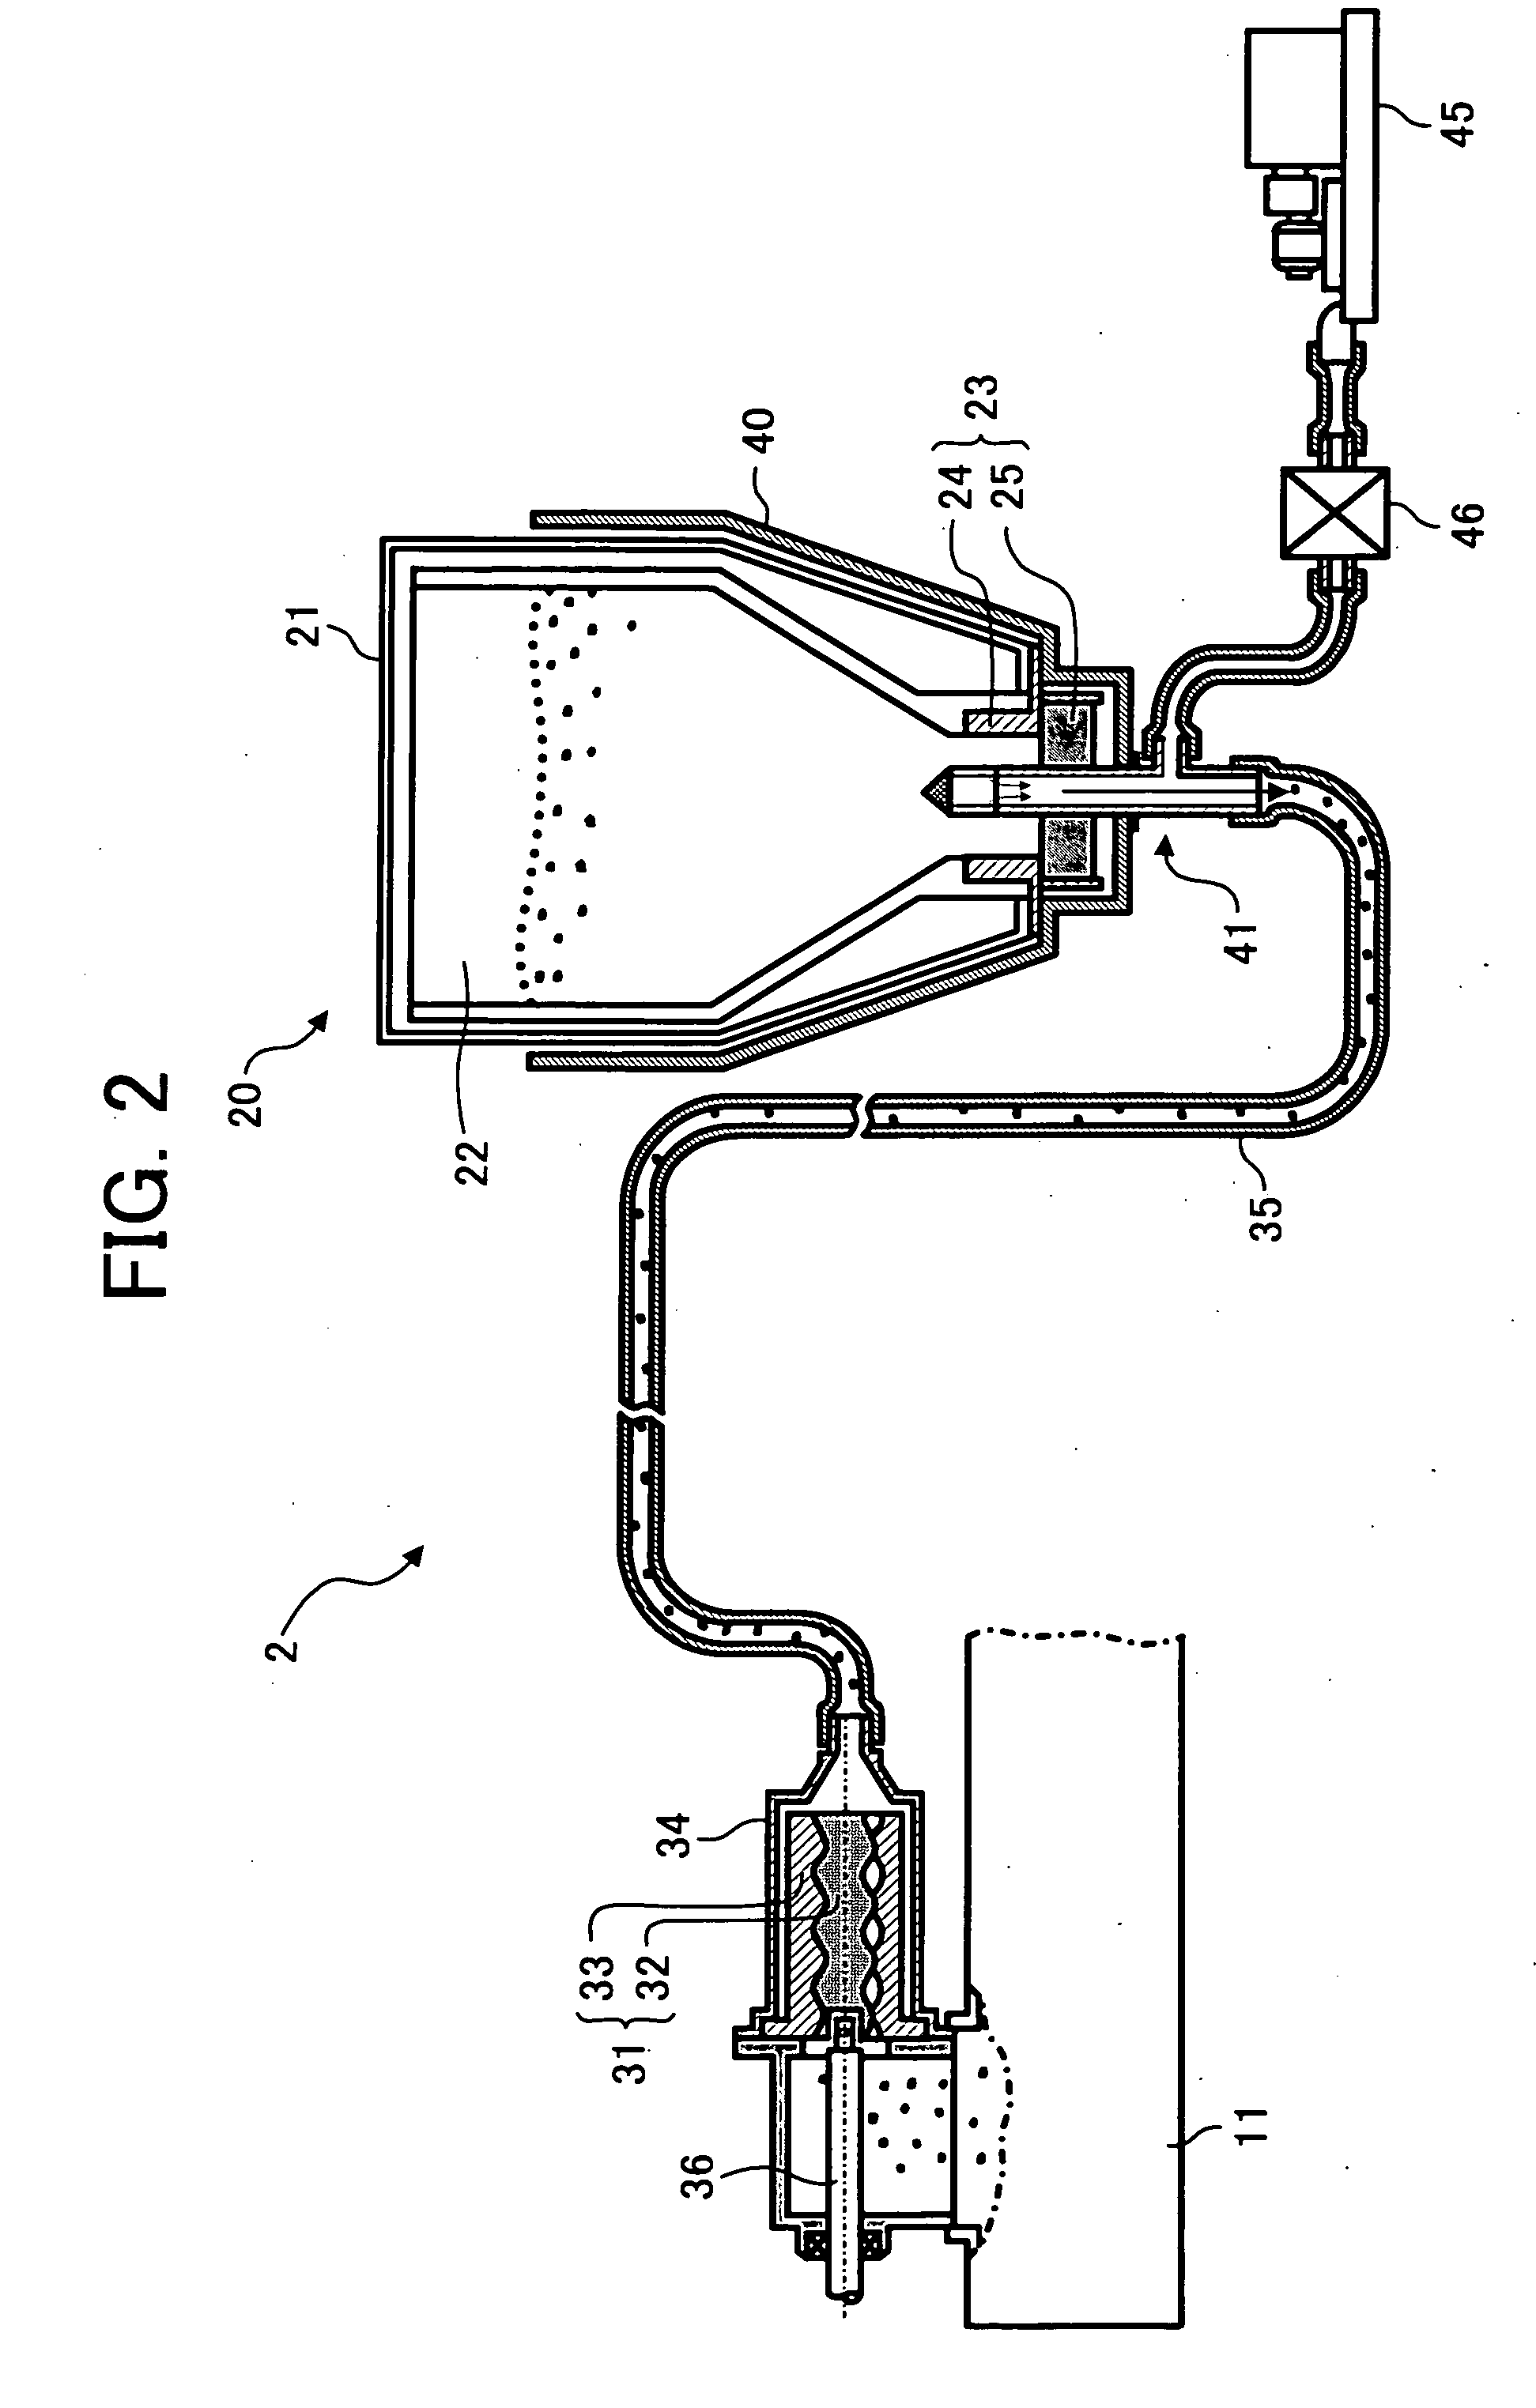 Image forming method and apparatus capable of efficiently replenishing toner from a soft toner container